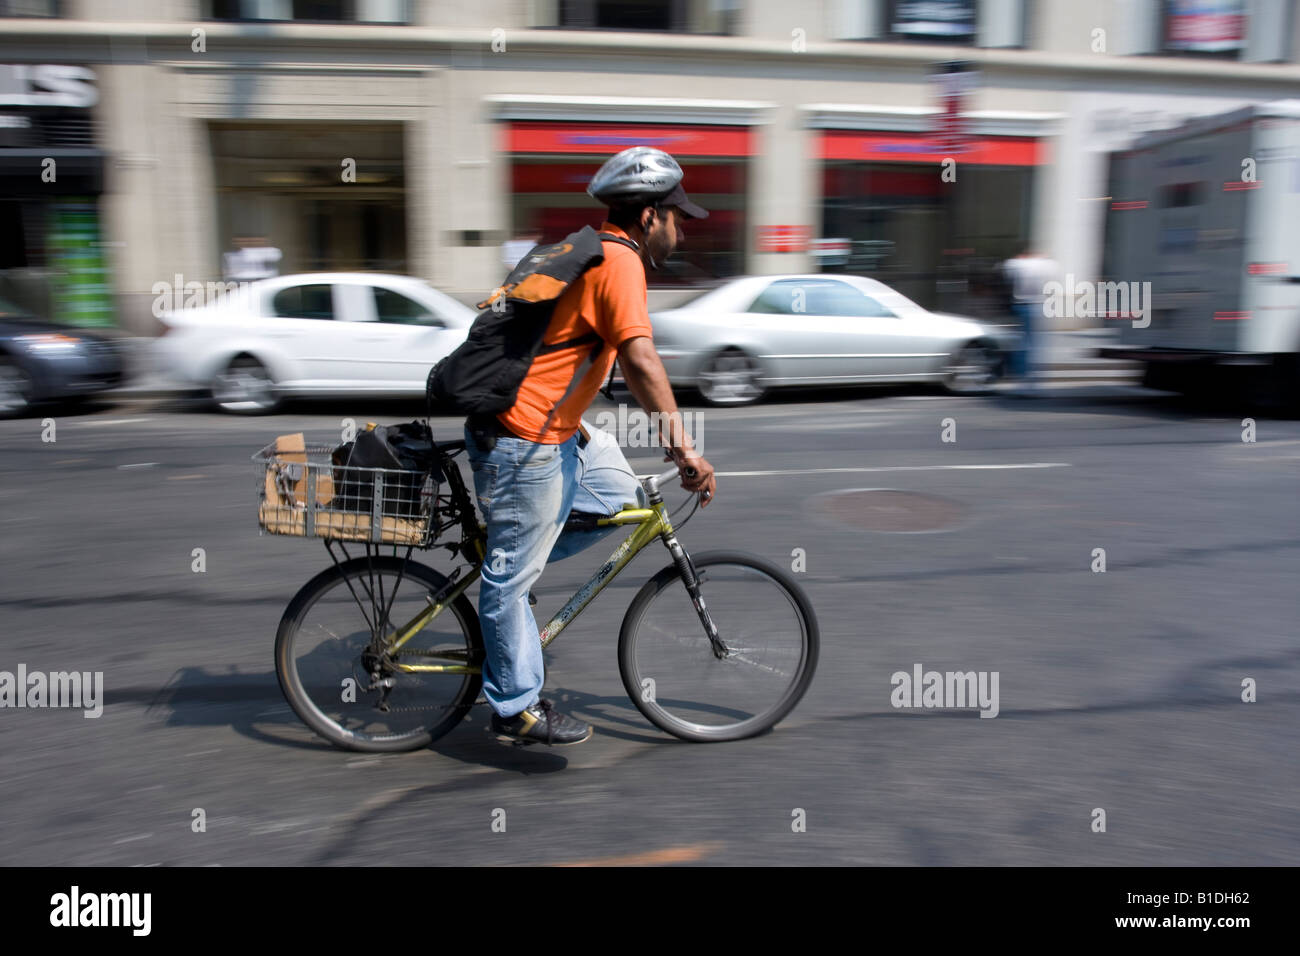 A bike messenger on Broadway in lower Manhattan, NY Stock Photo